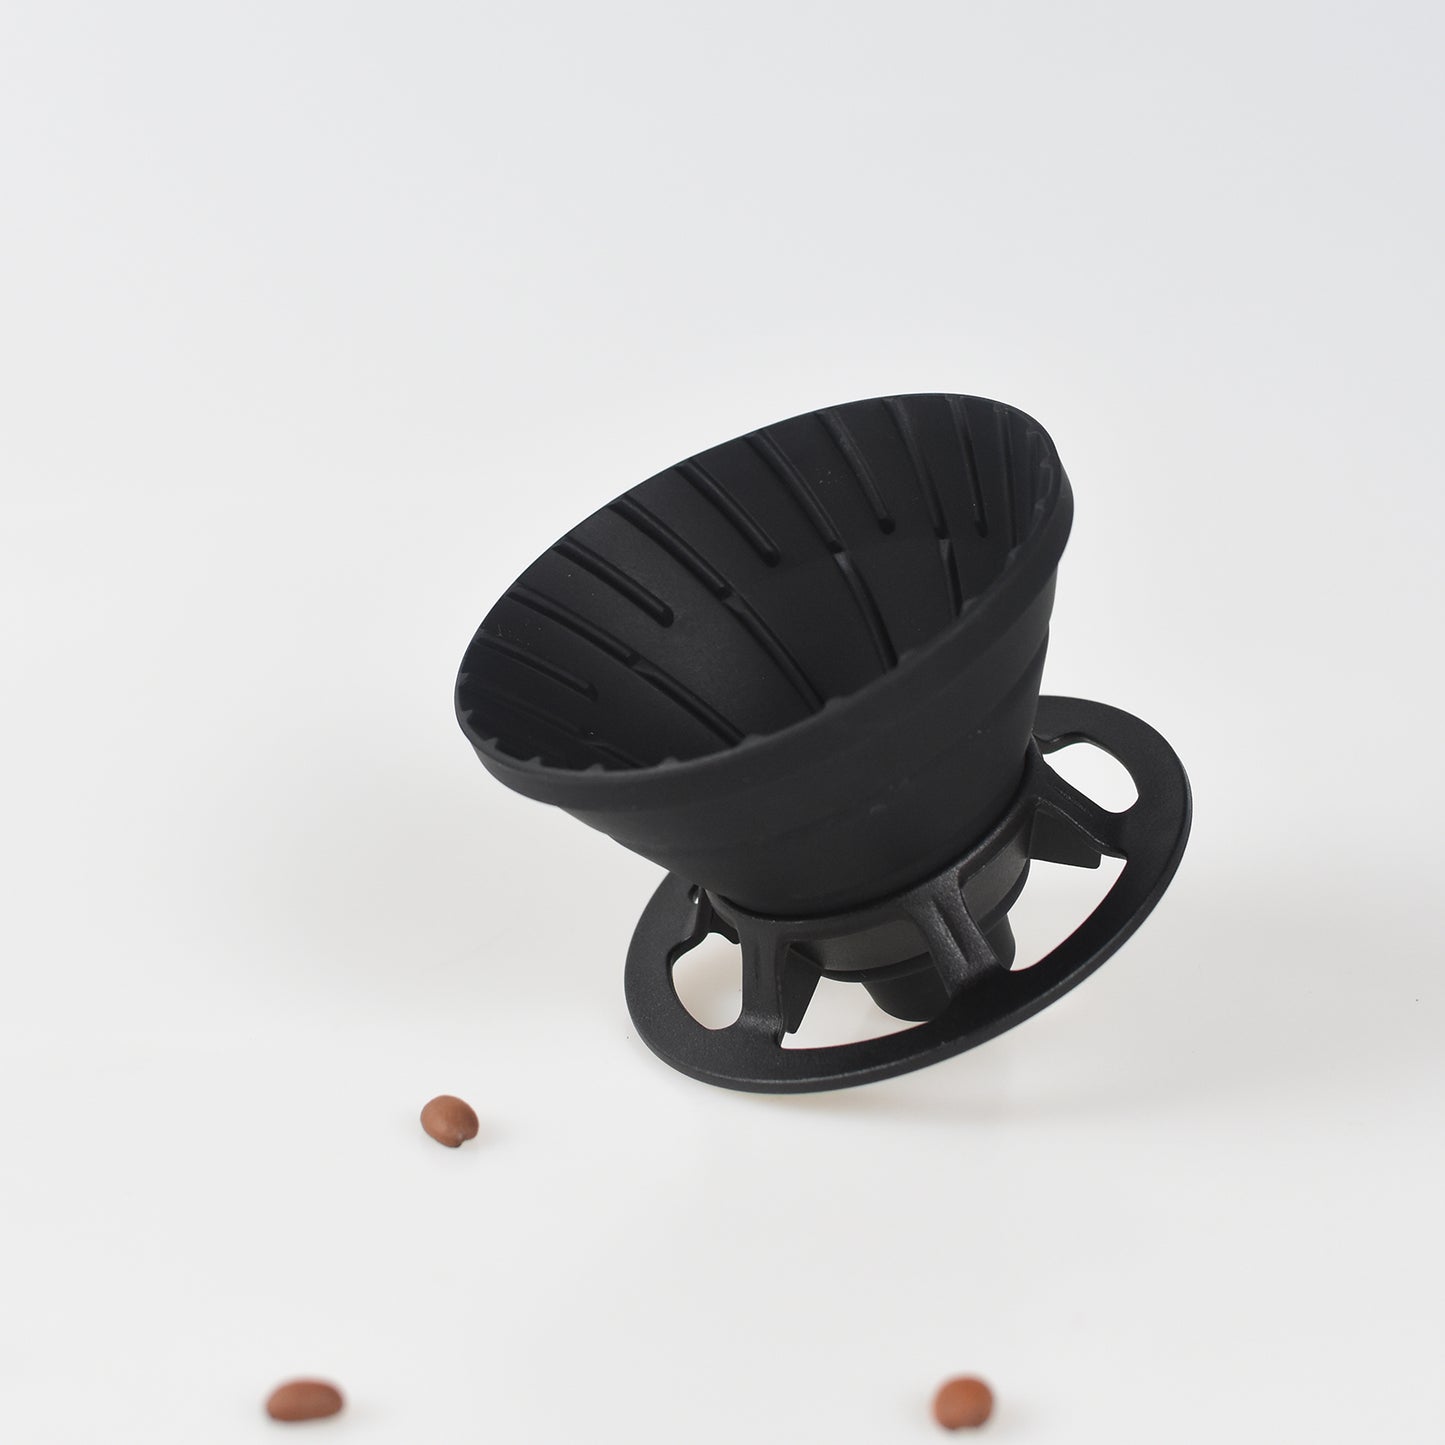 Vandroop Silicone Collapsible Coffee Dripper